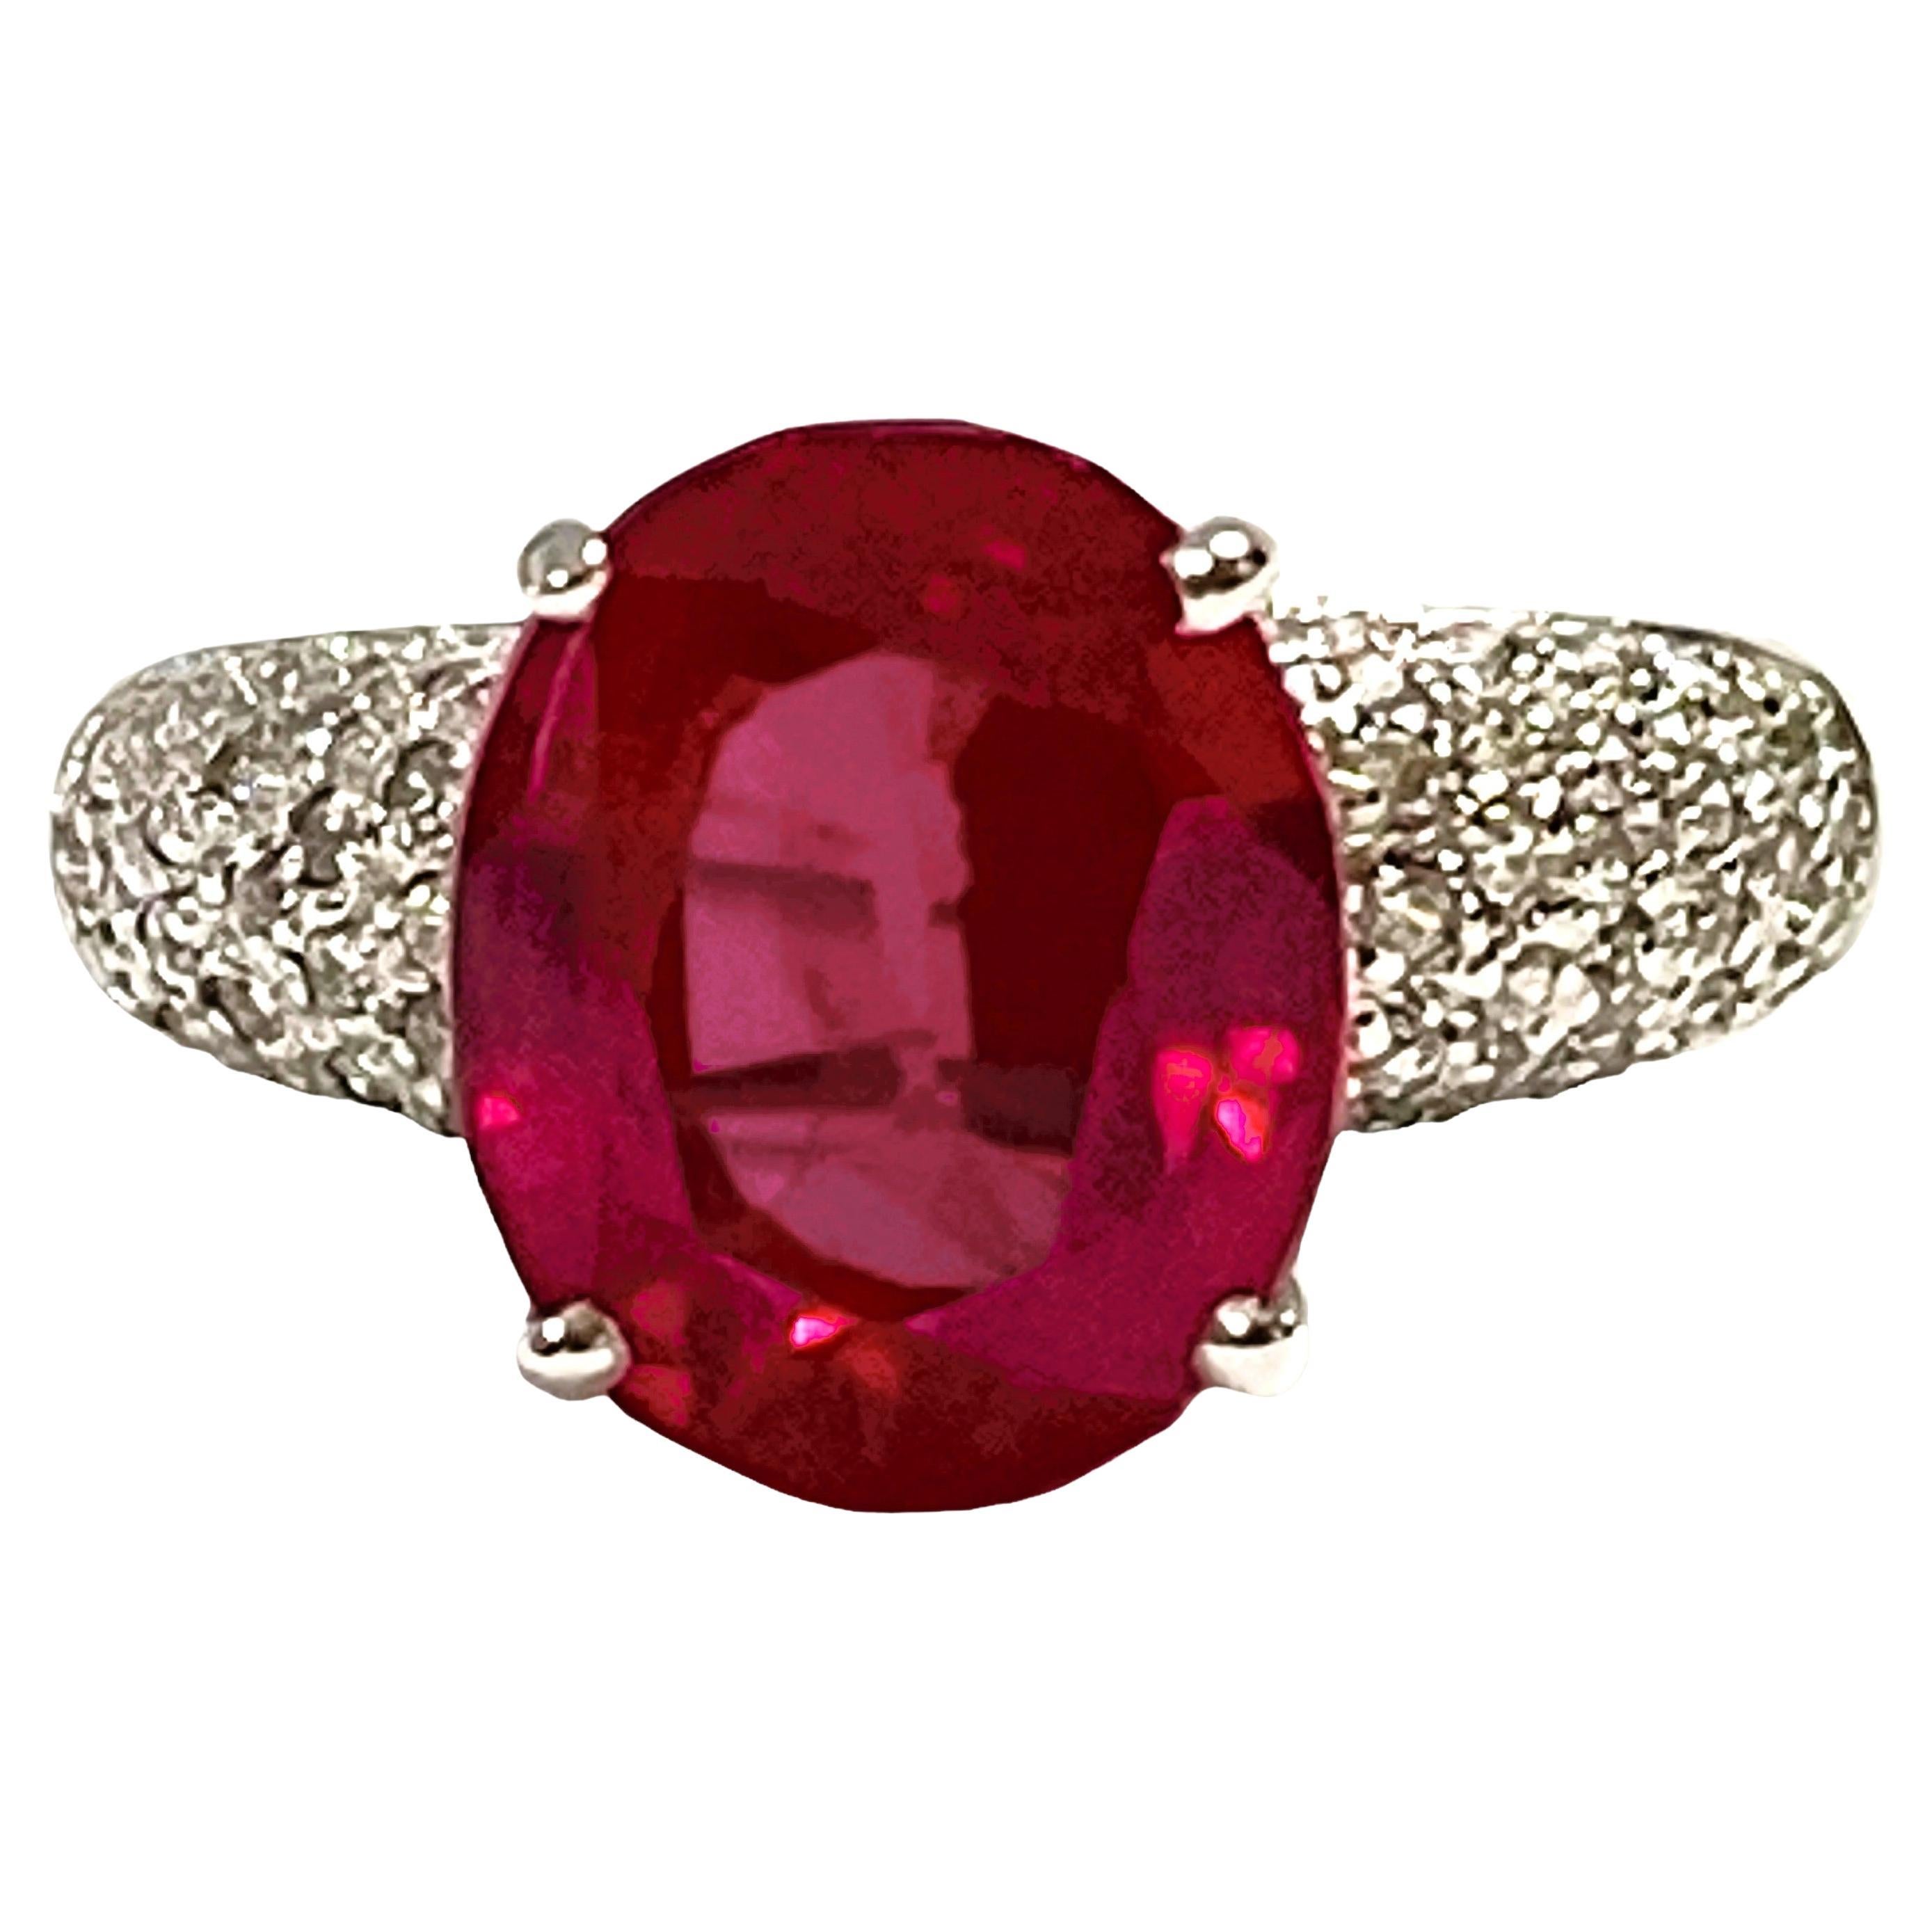 New Madagascar 5.2ct Pinkish Red Sapphire & White Sapphire Sterling Ring